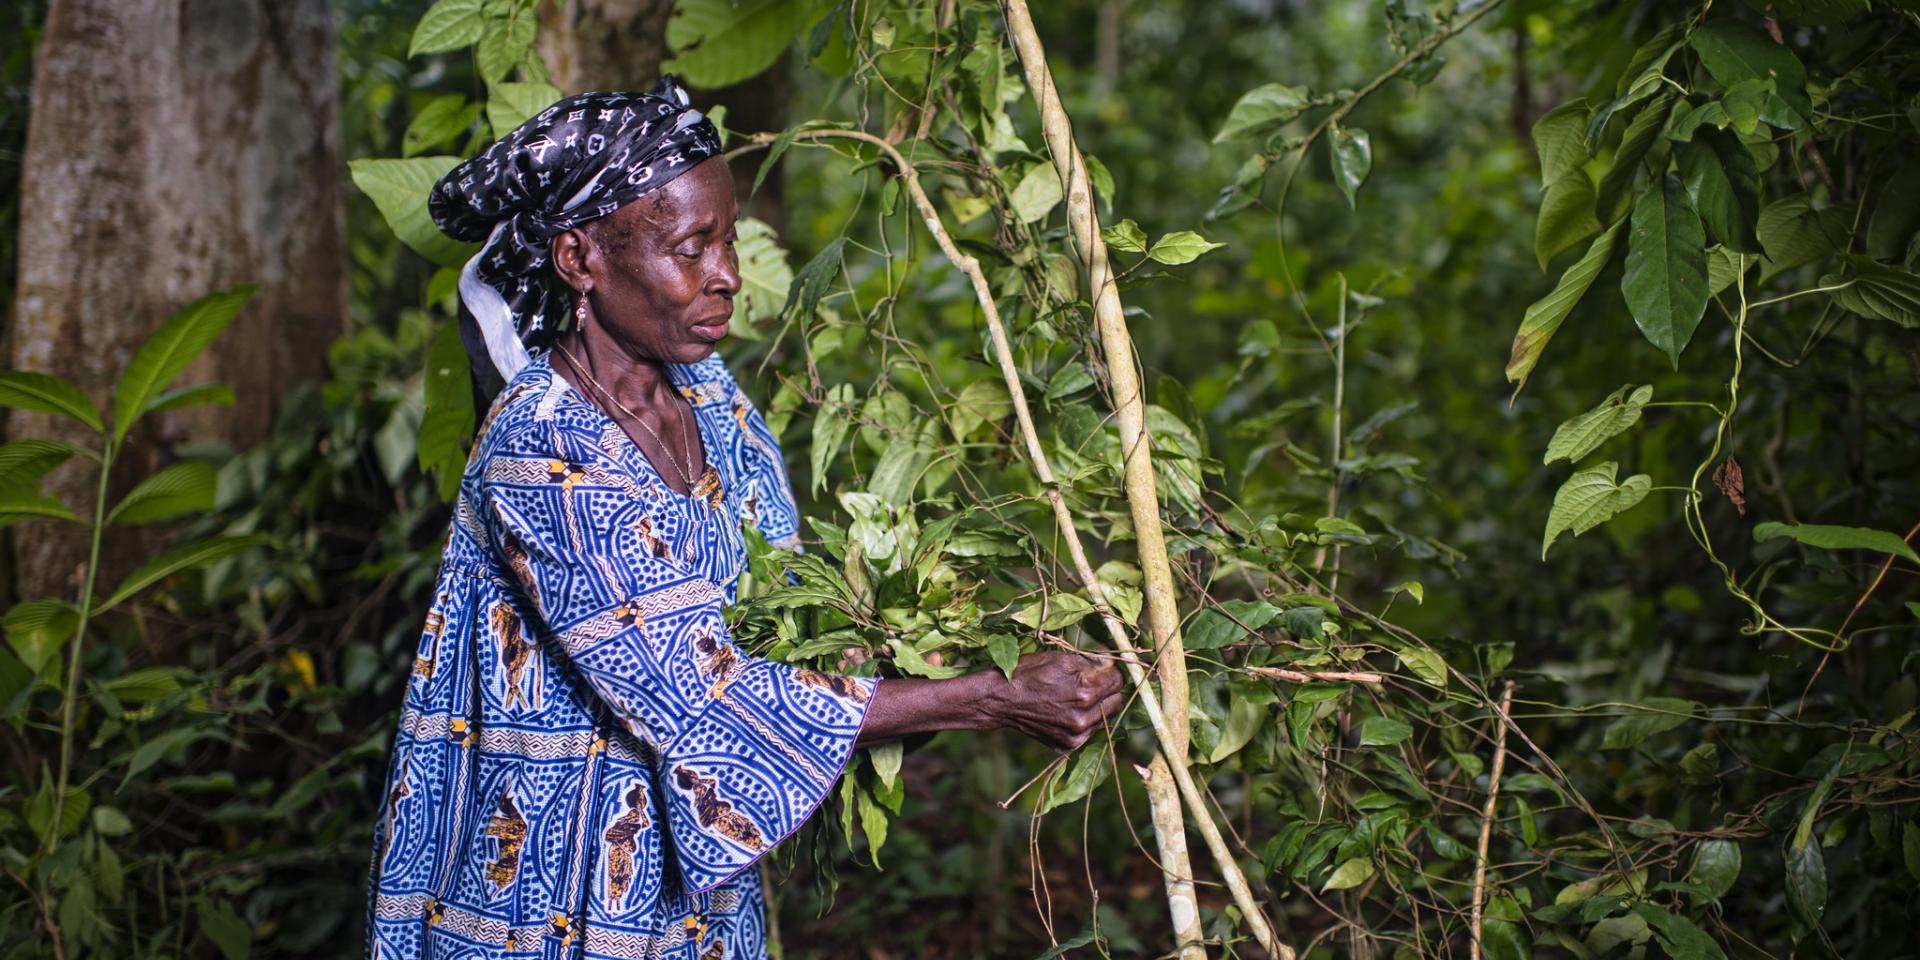 Diolo Celine harvests all the leaves from Gnetum in the village of Minwoho, Lekié, Center Region, Cameroon. 